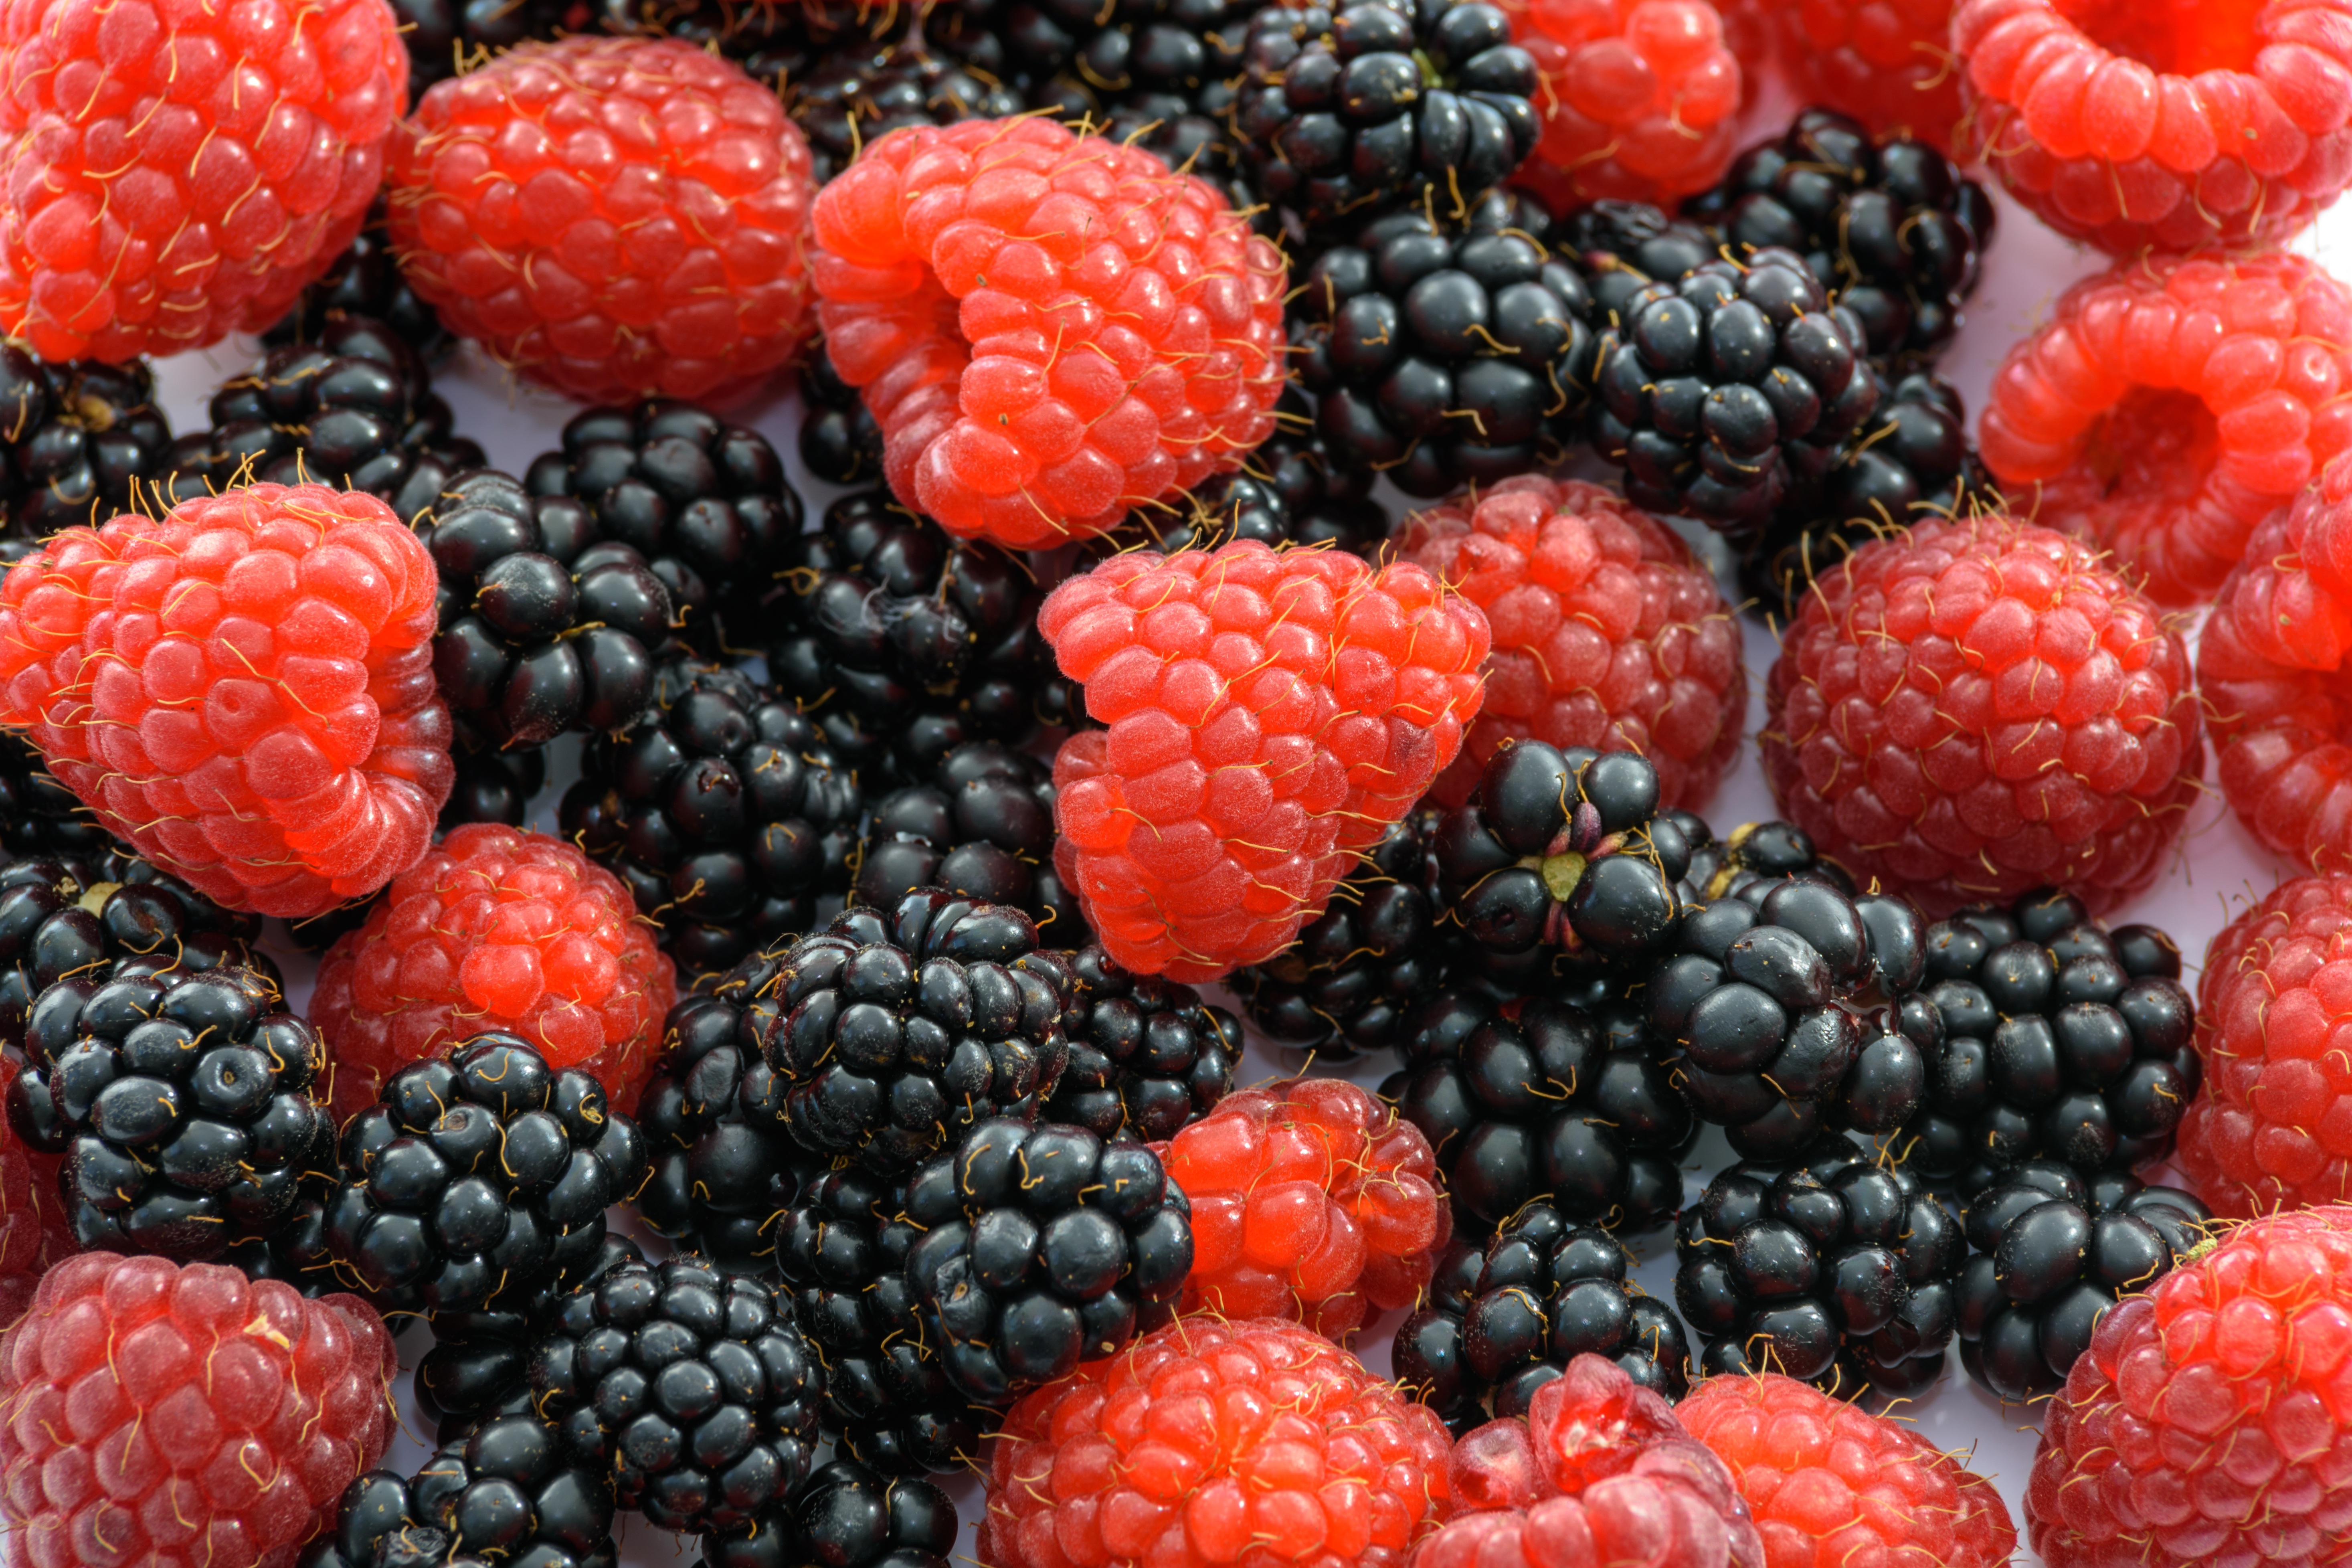 149958 download wallpaper ripe, food, raspberry, berries, blackberry, juicy screensavers and pictures for free